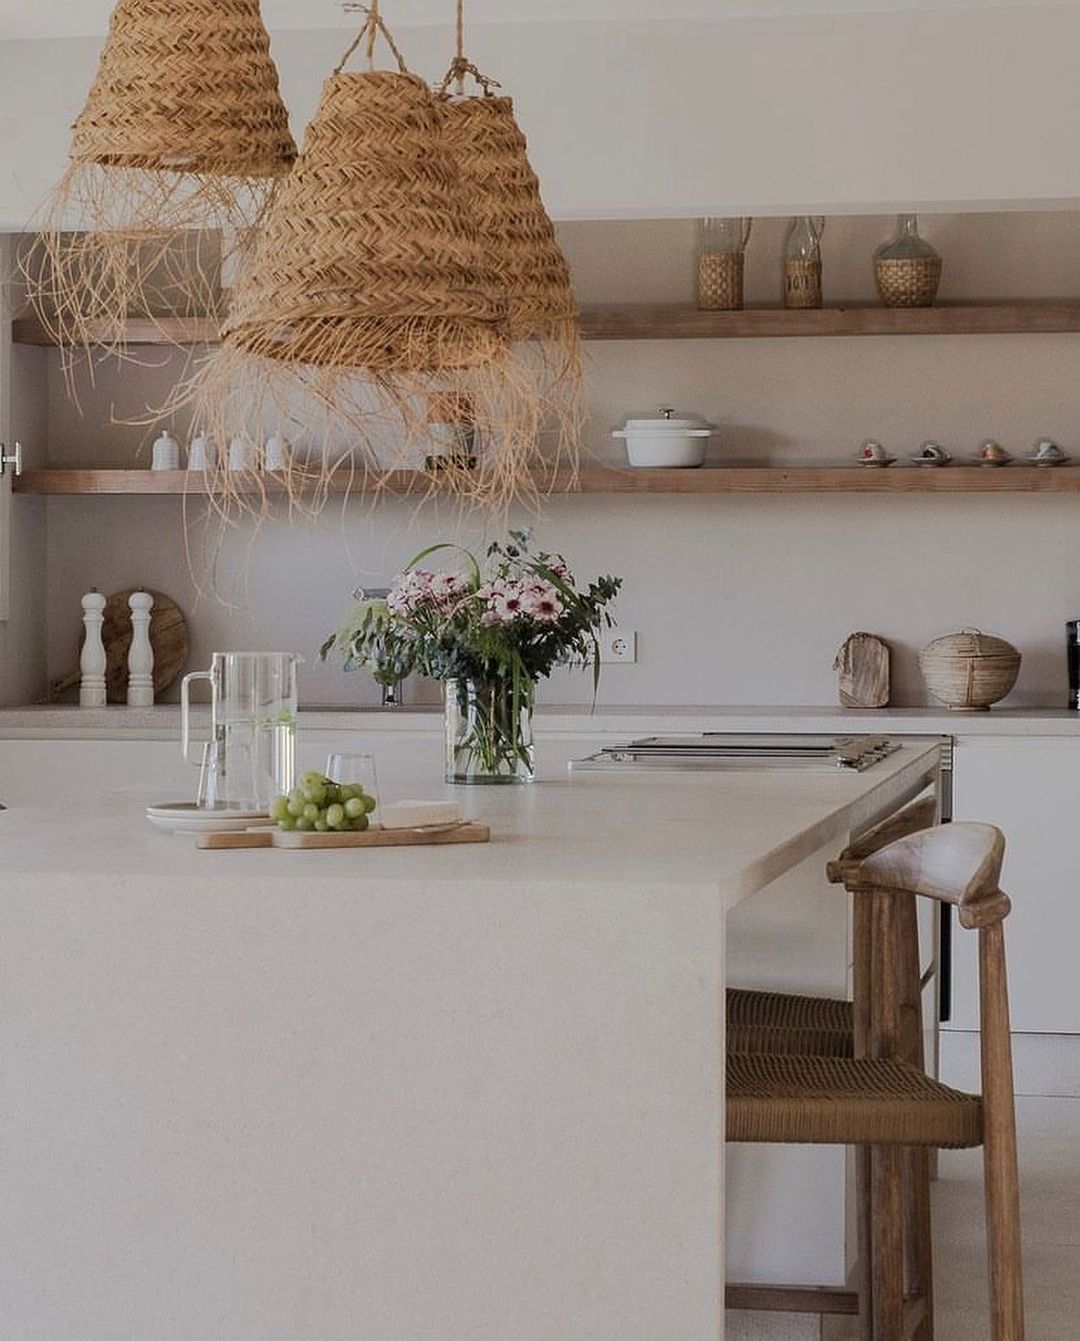 a minimalist style kitchen with bohemian inspired rattan pendant lights to bring a relaxed feel to the space